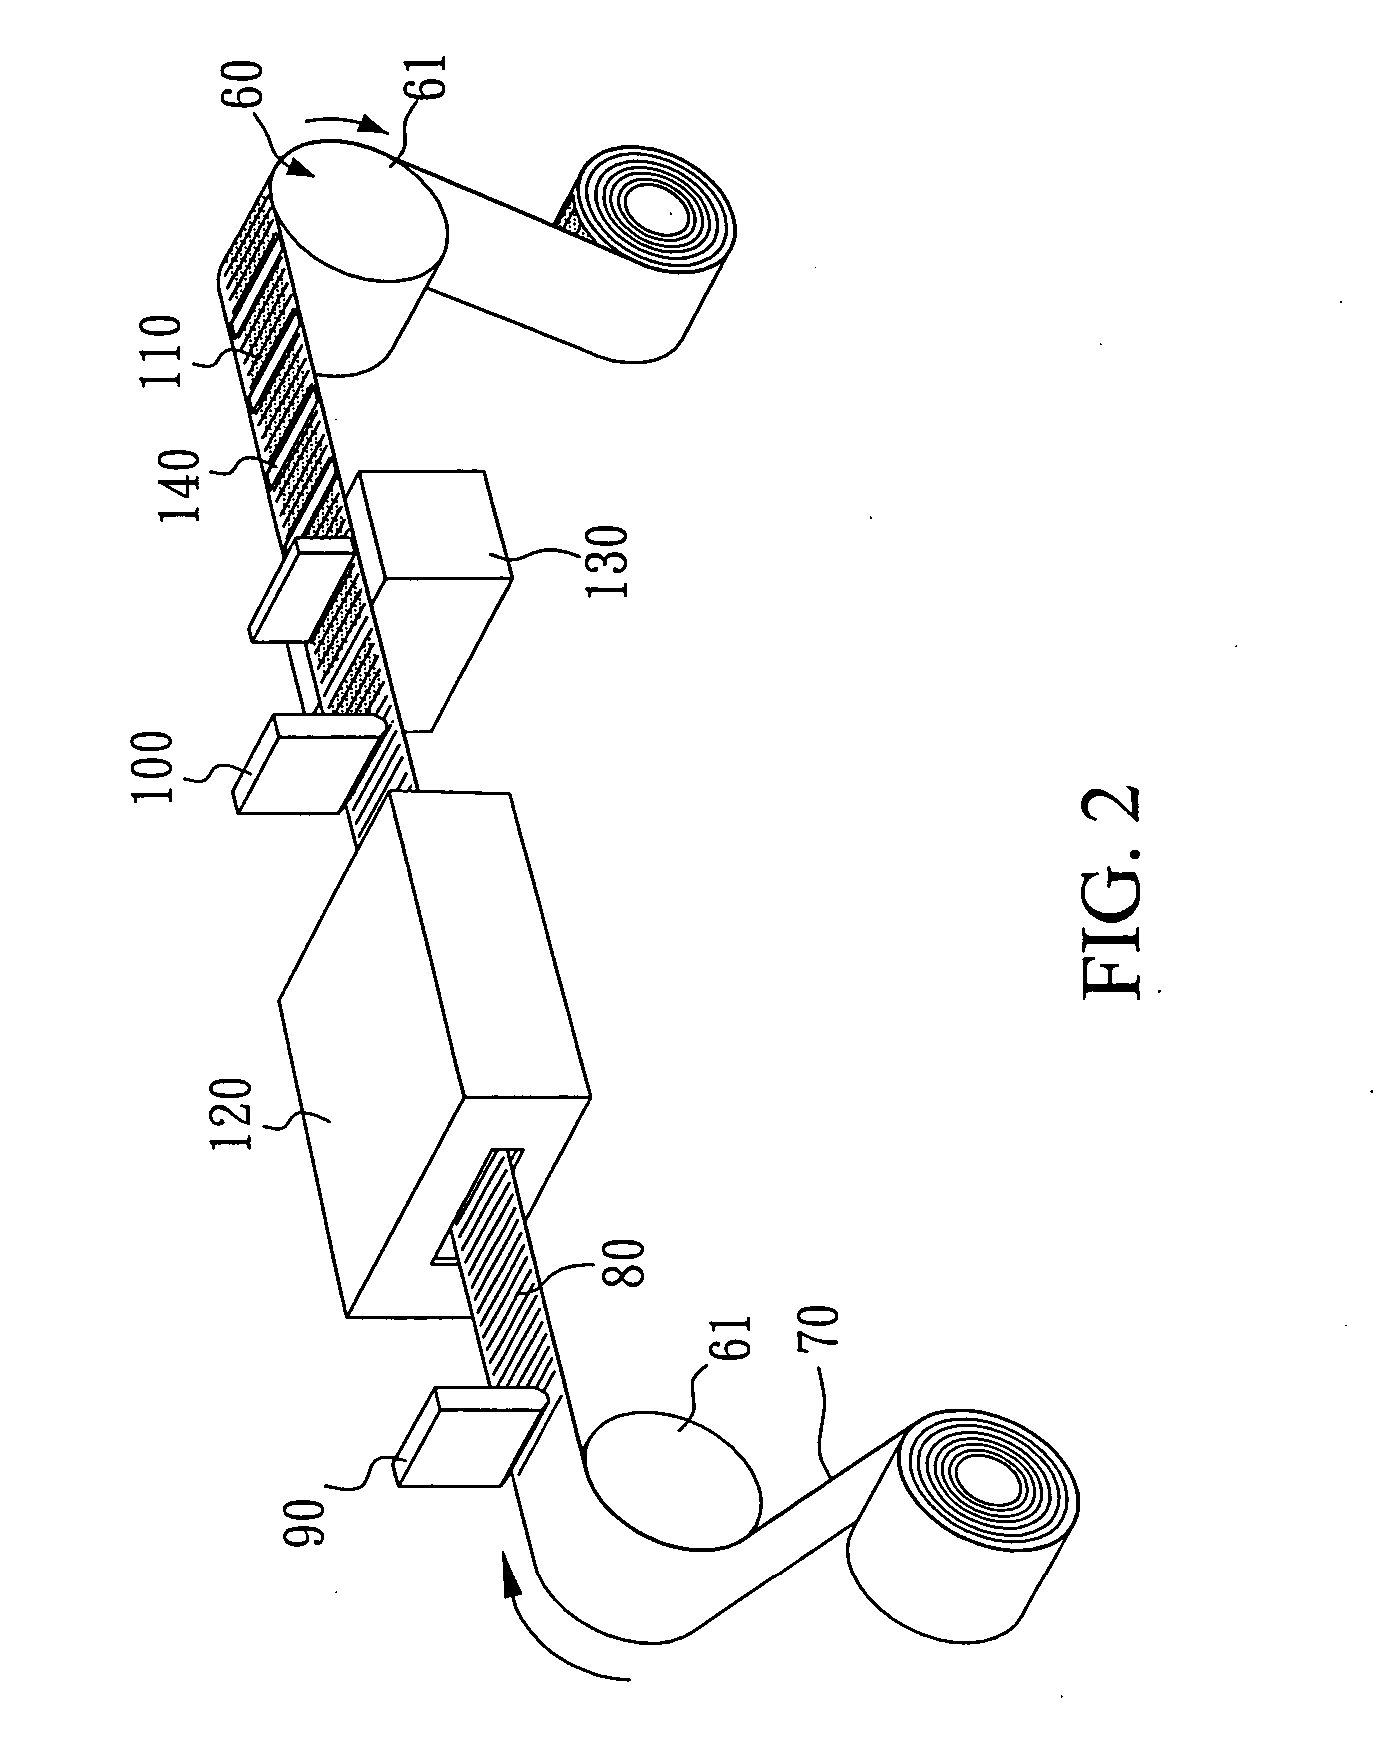 Roll-to-roll process for fabricating passive matrix plastic displays